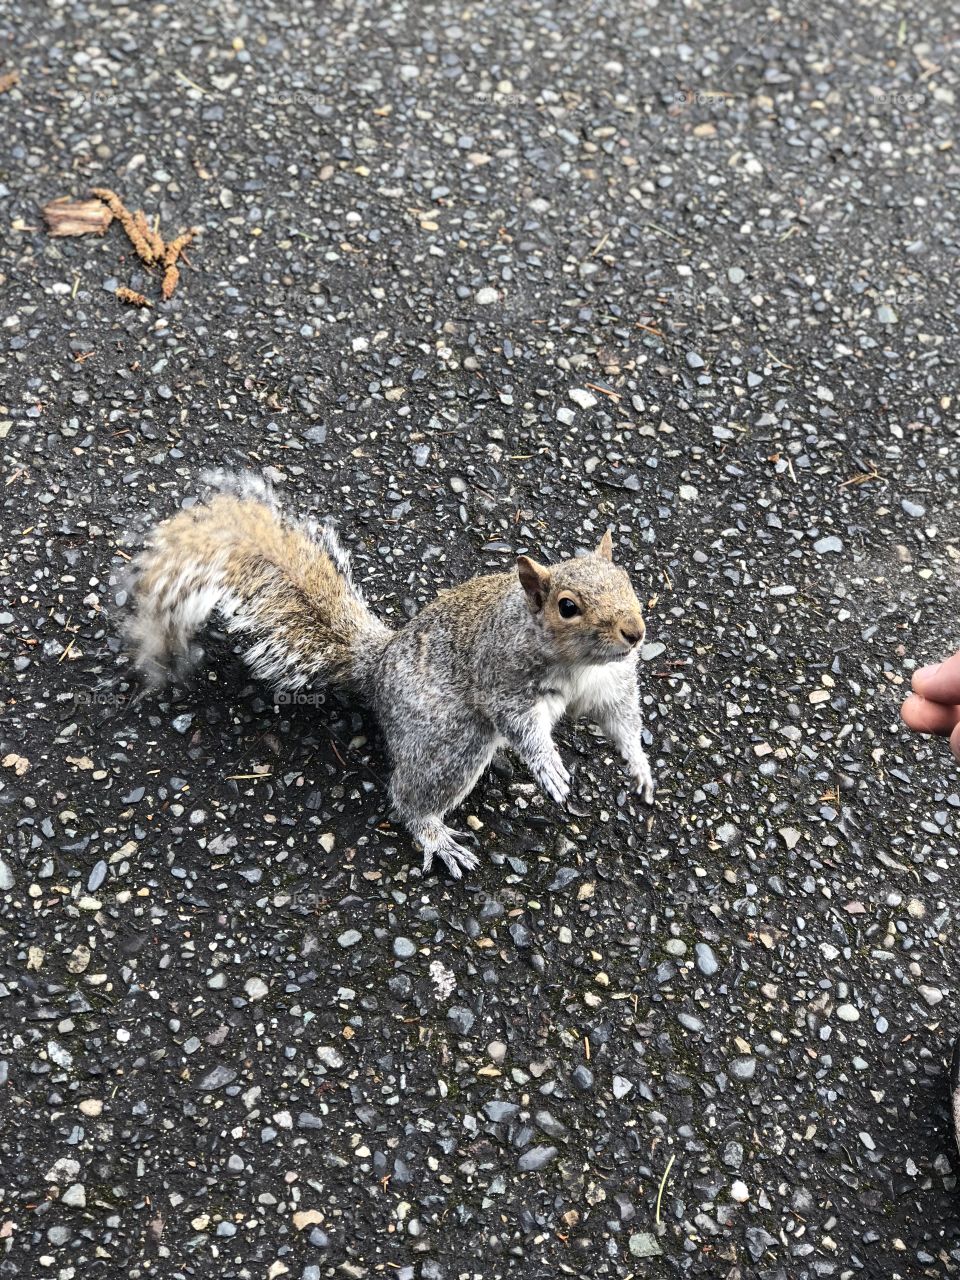 Our new squirrel friend :)